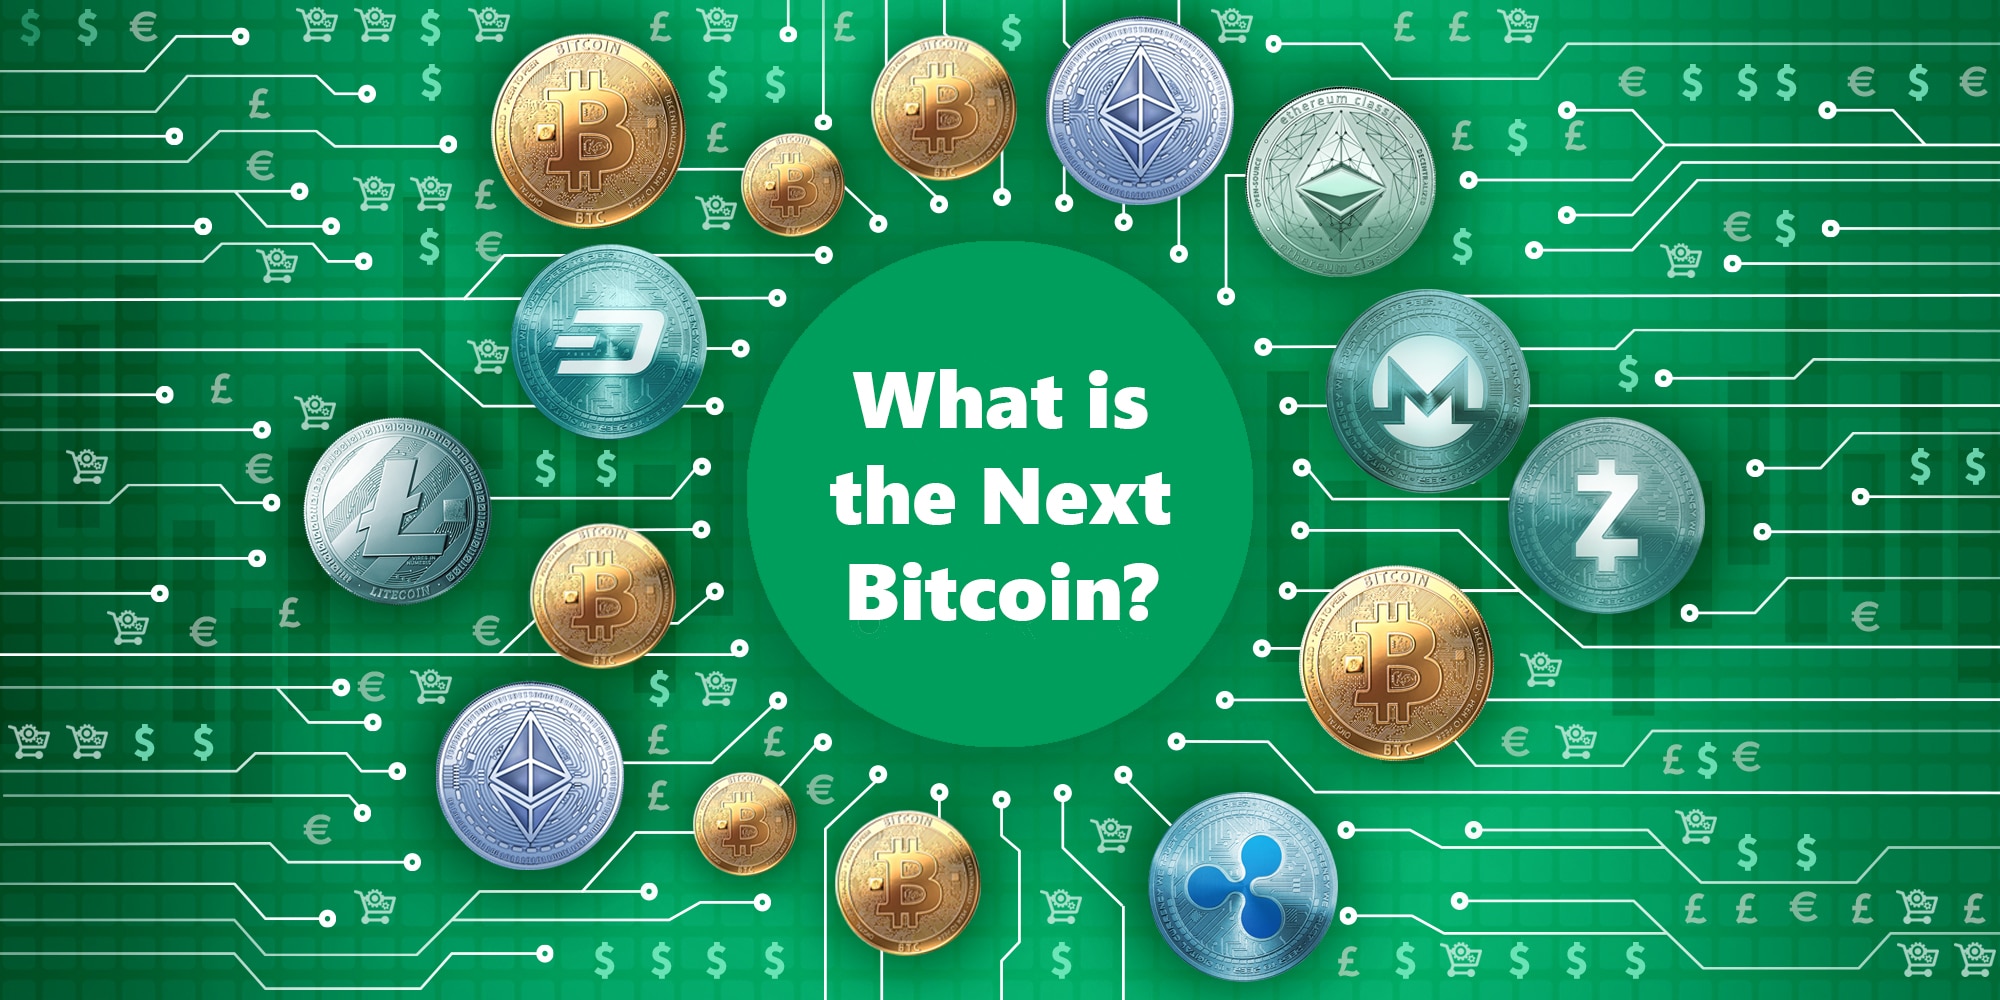 What's the next Bitcoin? Here are 4 possible candidates